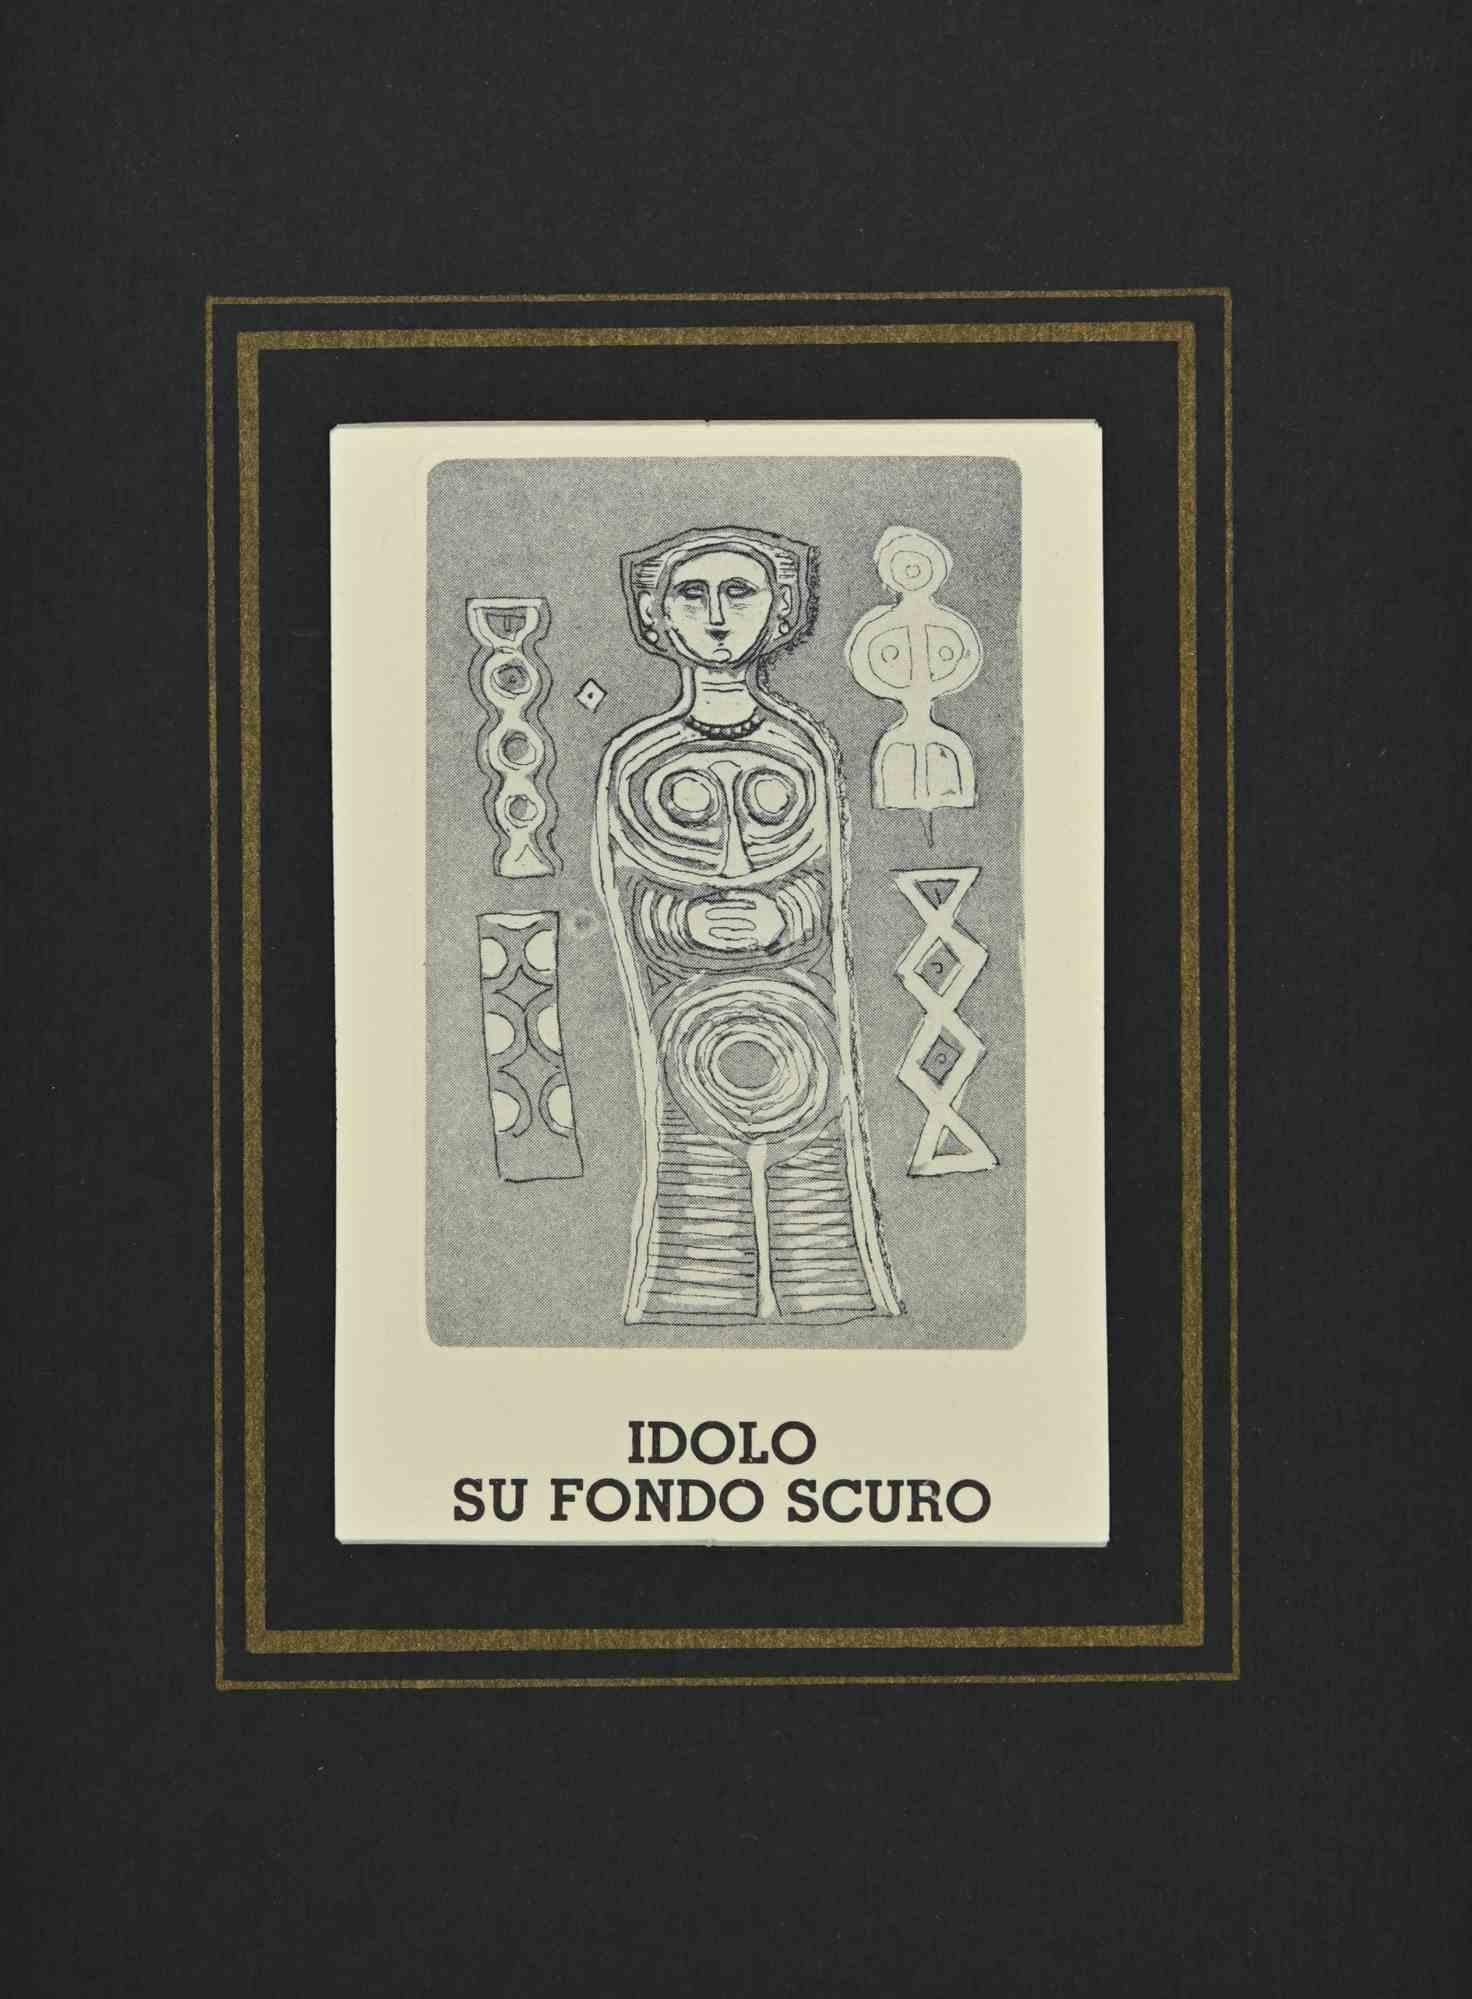 Idol on Dark Background is a print realized by Massimo Campigli in the 1970/1971s.

Etching on paper.

This artwork it is part of a series of works created in the last period of the artist and printed at the turn of the year of his death, which took